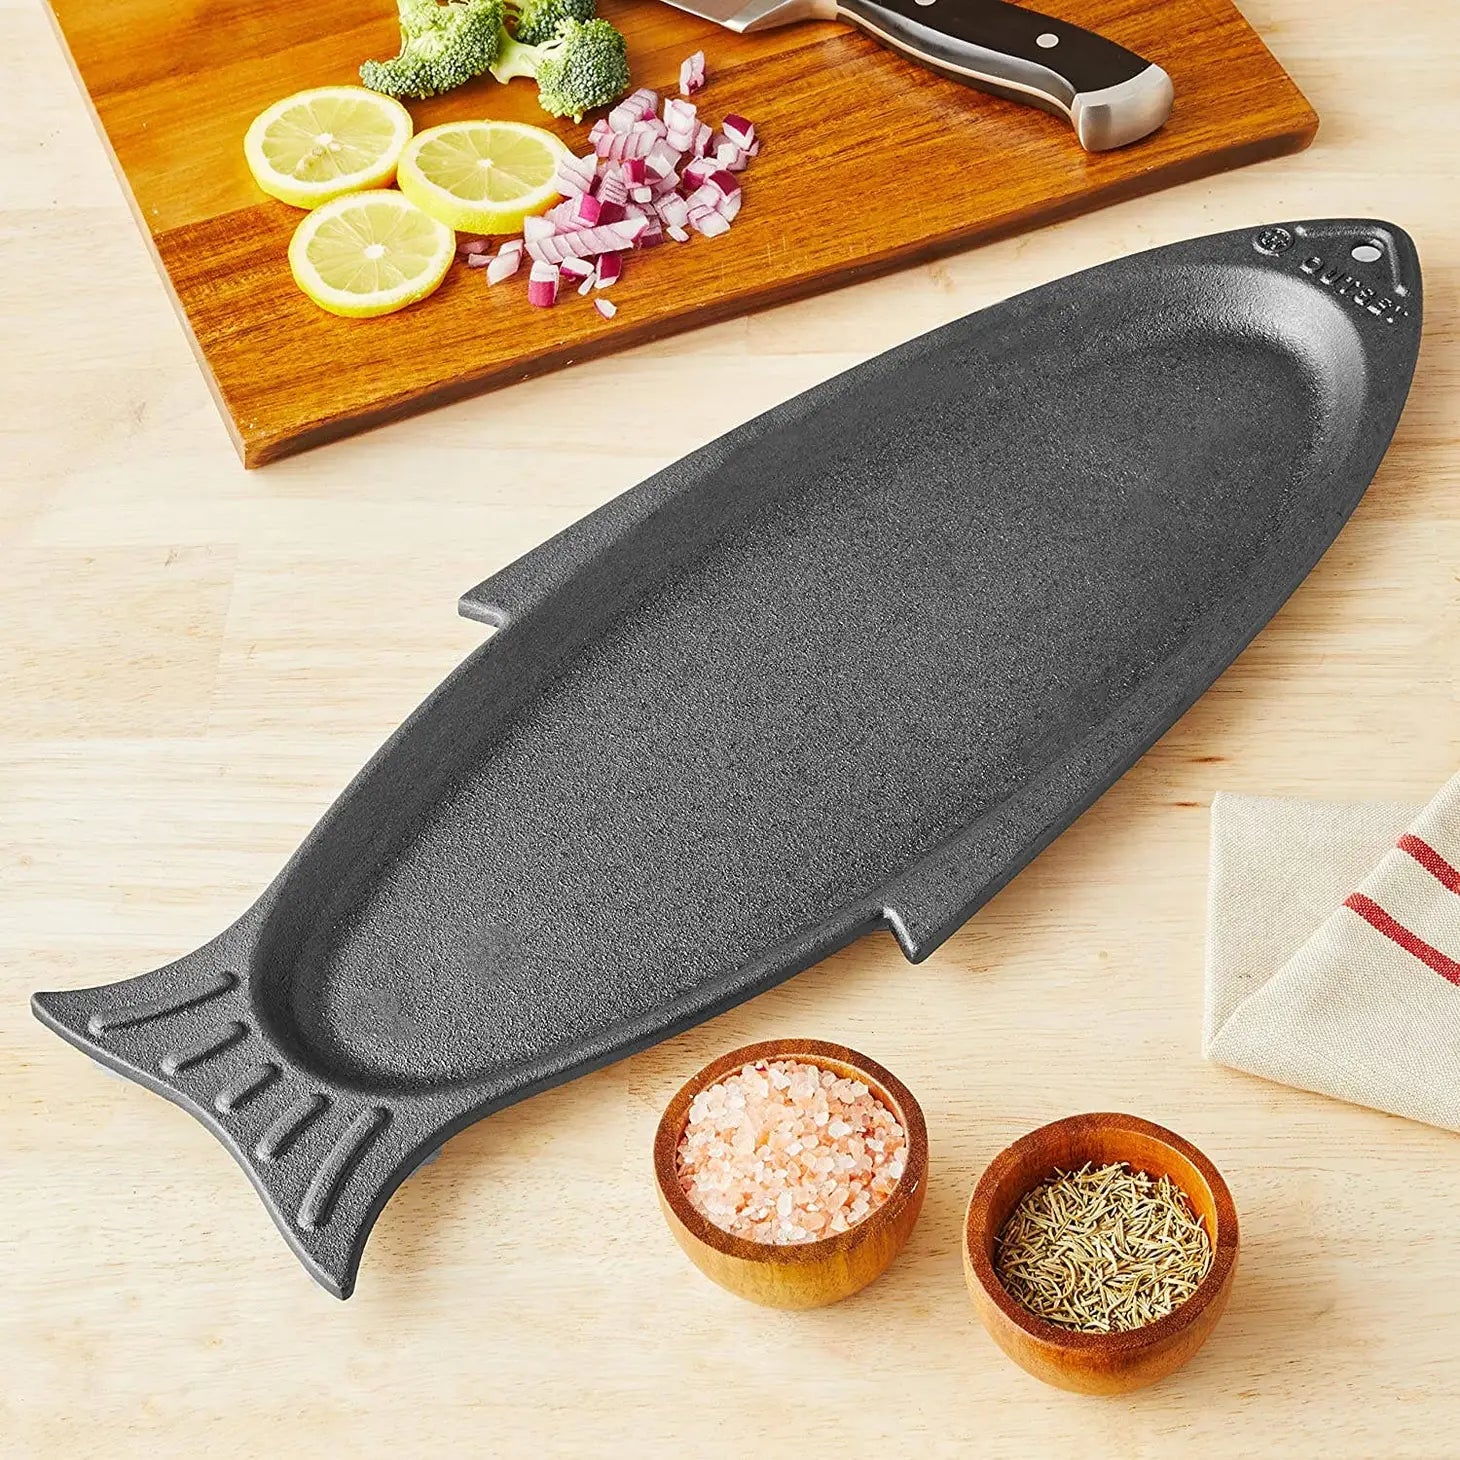 Fish Grill Pan- Outset Cast Iron – Kim Hovell